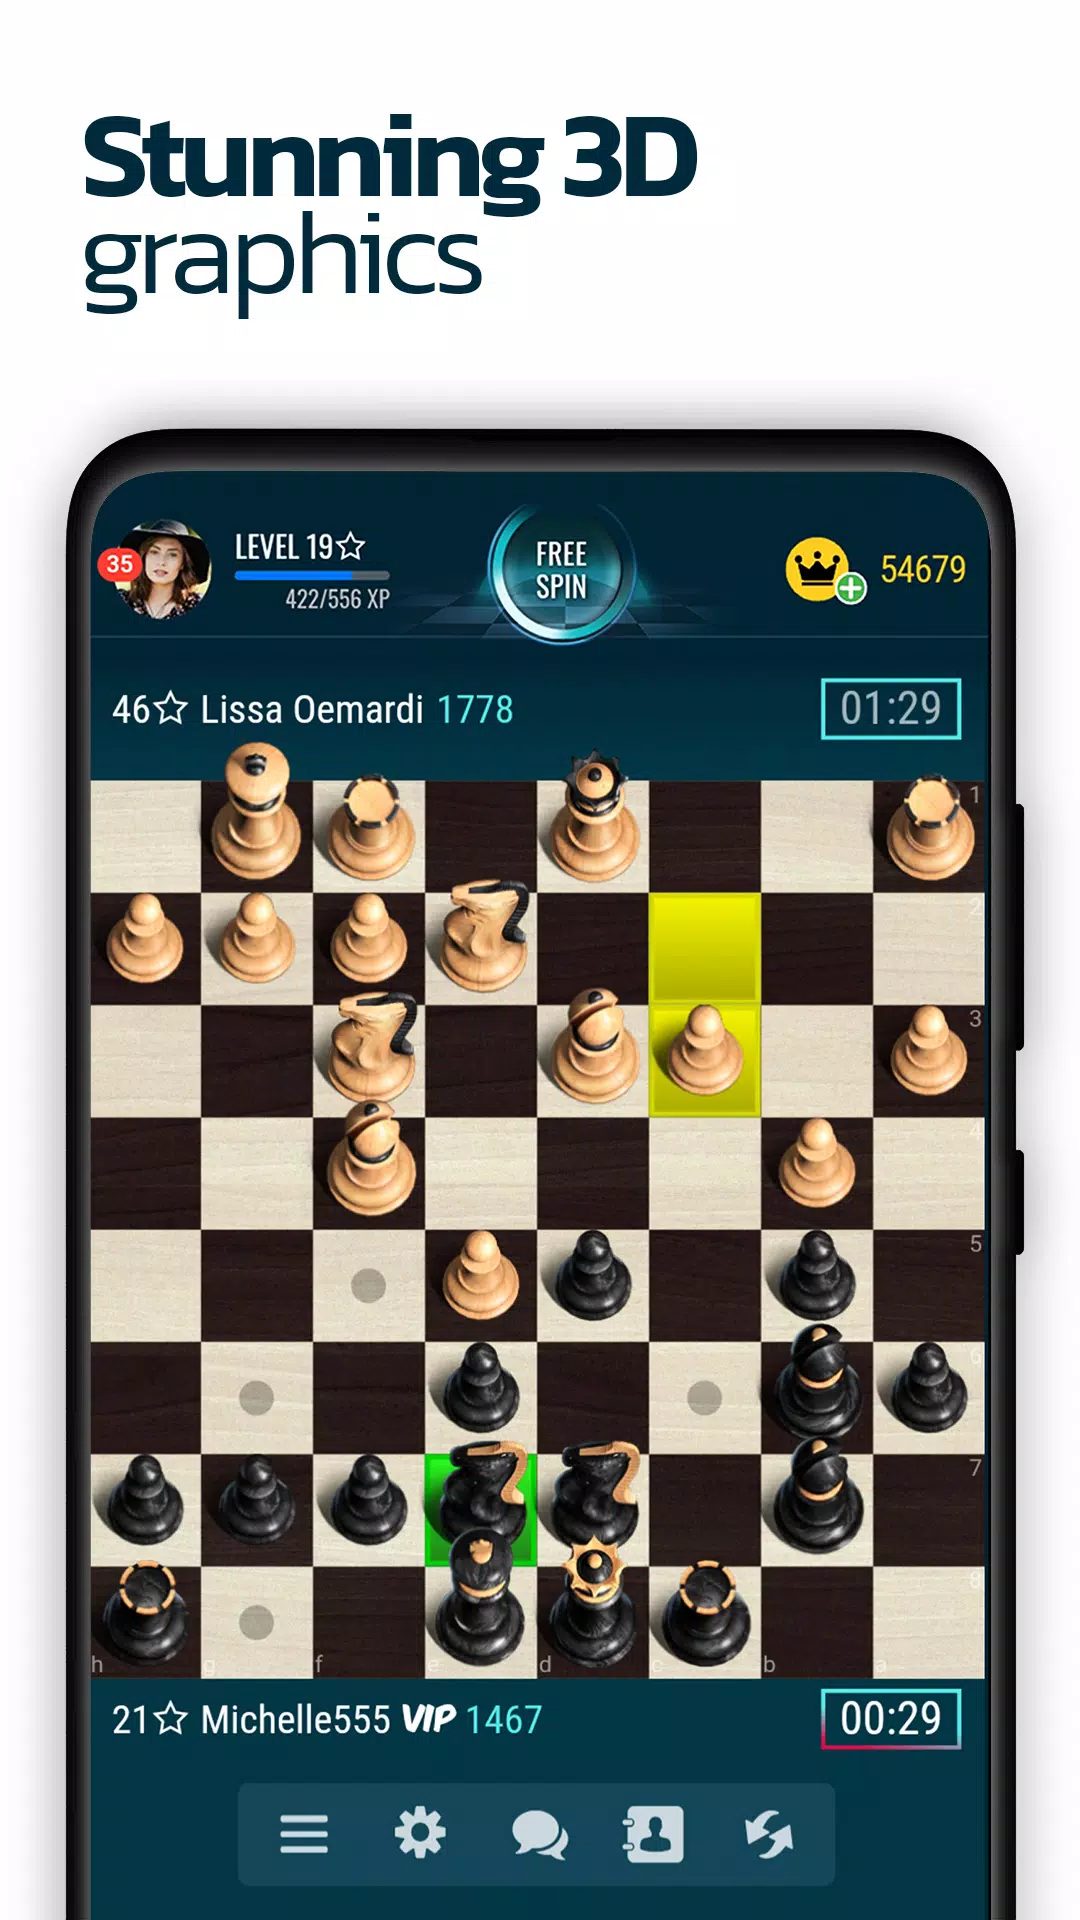 Chess Online Apk Download for Android- Latest version 5.6.7